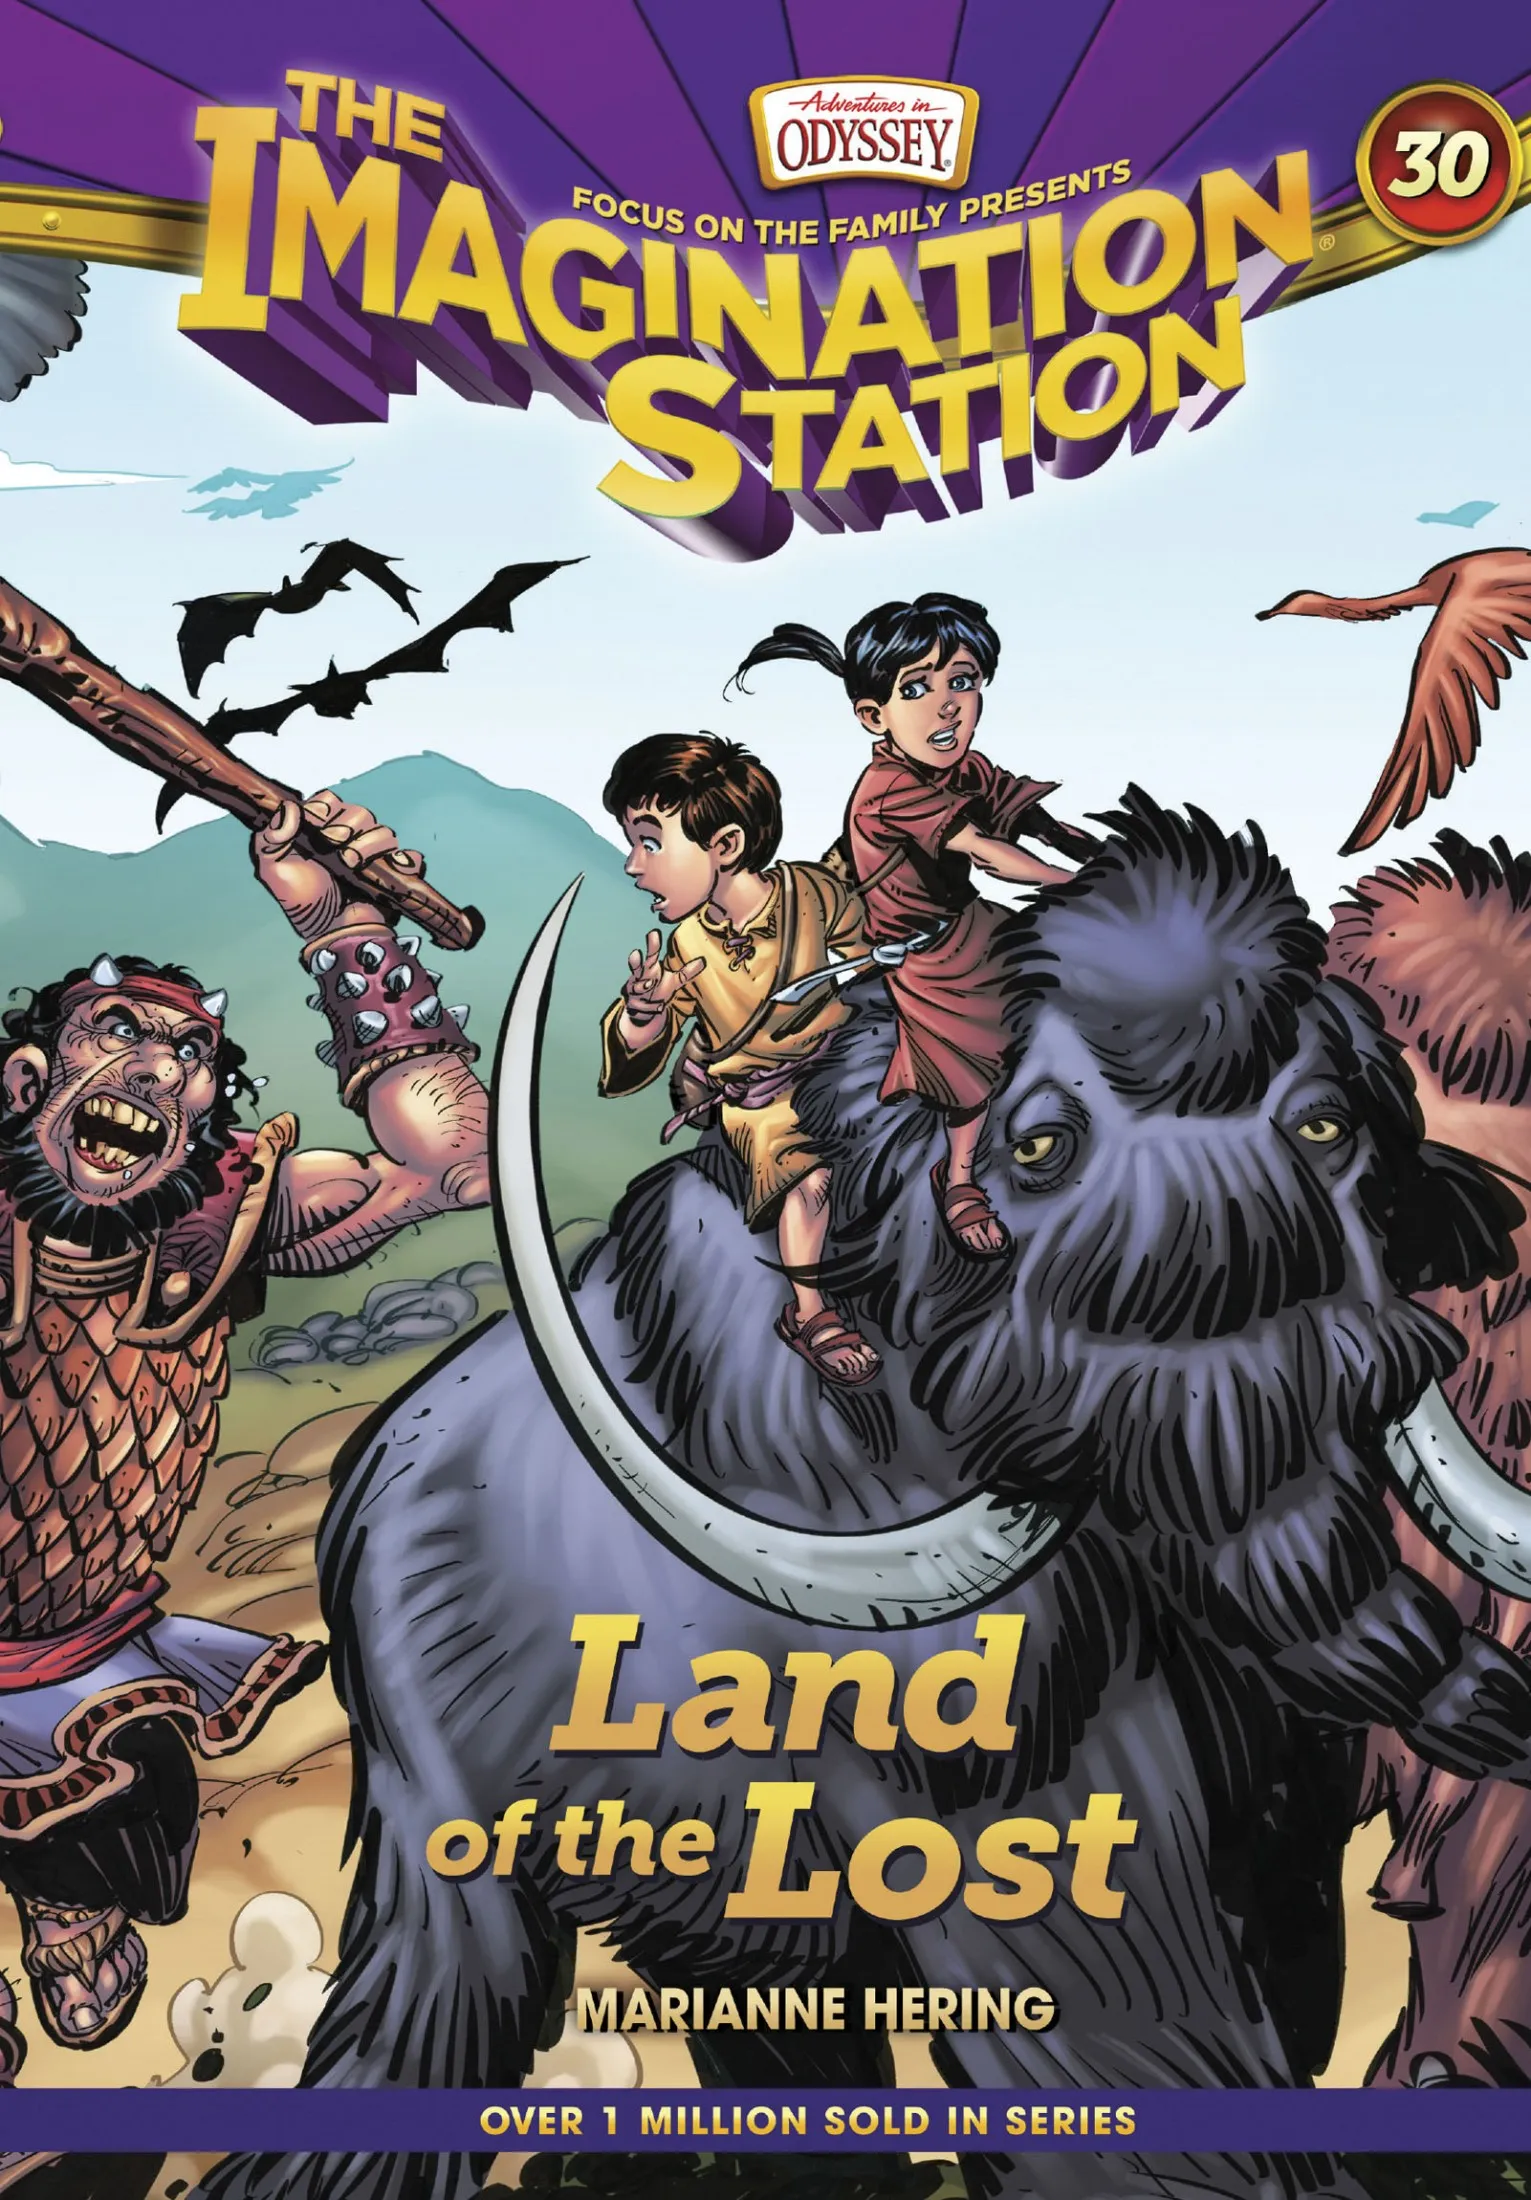 Land of the Lost (AIO Imagination Station #30)